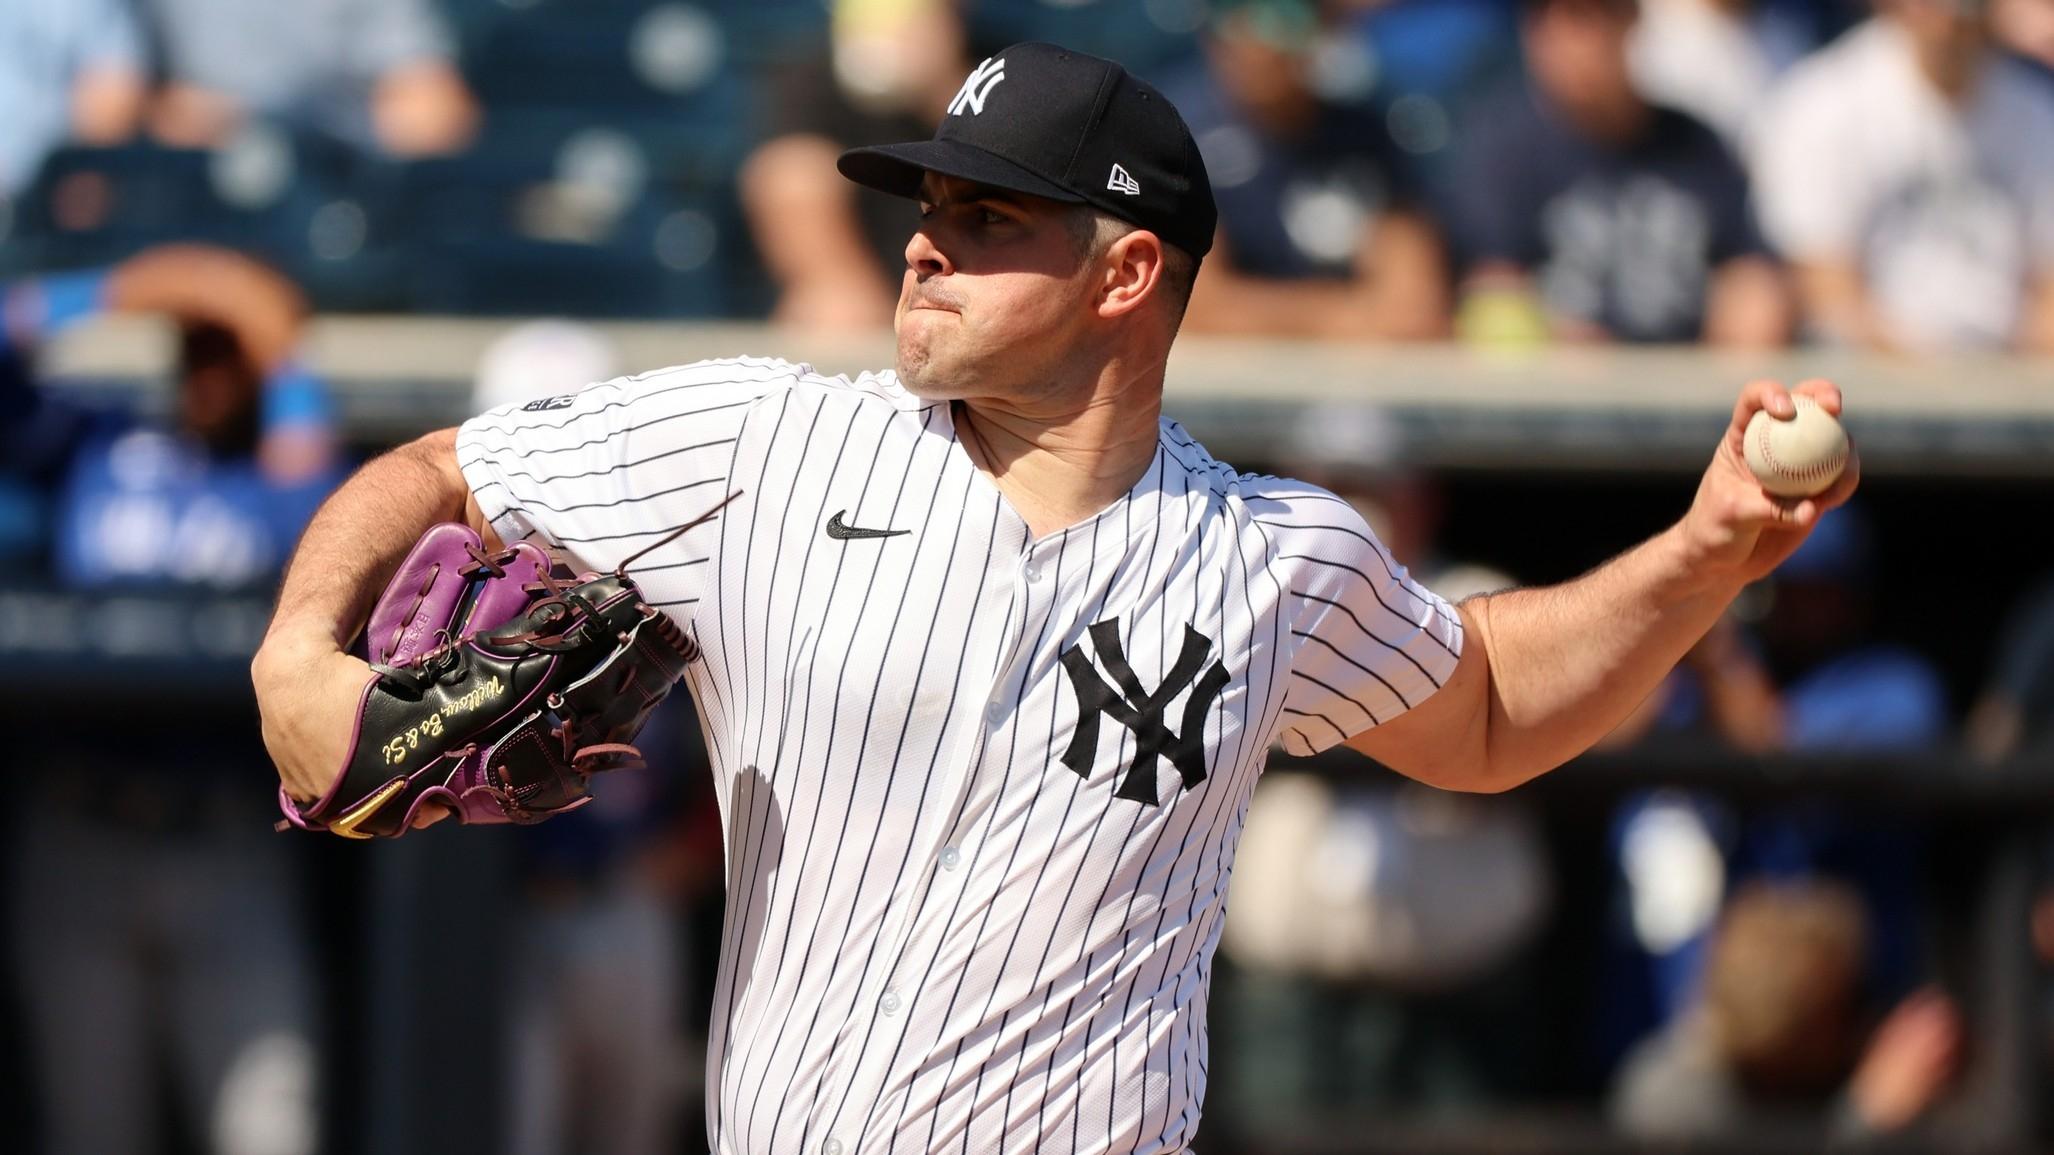 New York Yankees starting pitcher Carlos Rodon (55) throws a pitch during the first inning against the Toronto Blue Jays at George M. Steinbrenner Field. / Kim Klement Neitzel-USA TODAY Sports